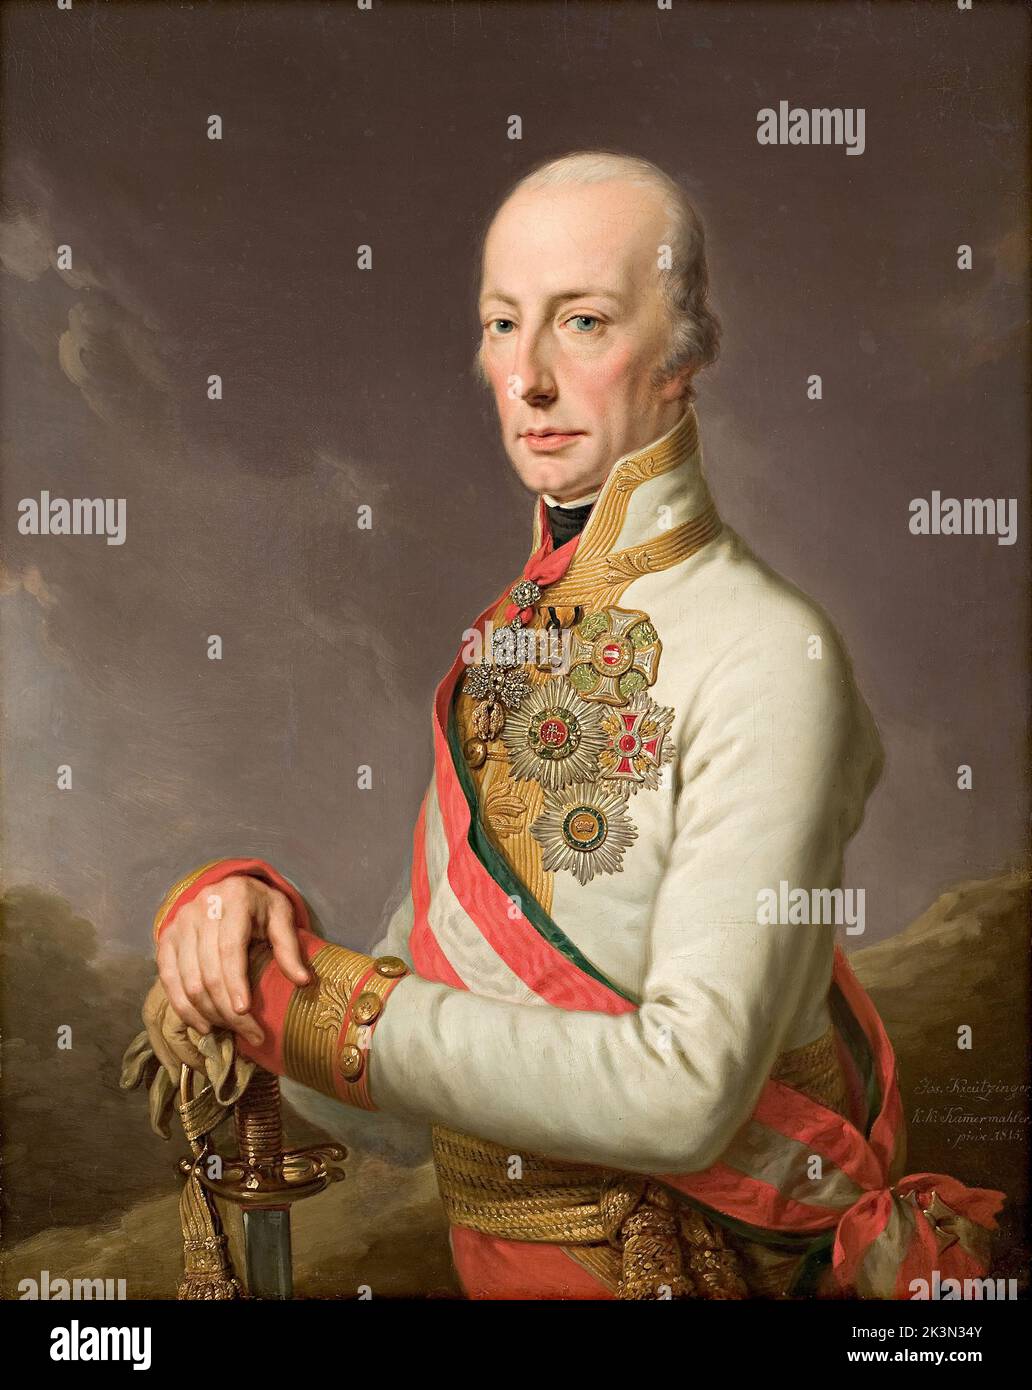 Francis II (German: Franz II.; 12 February 1768 – 2 March 1835) was the last Holy Roman Emperor (from 1792 to 1806) and, as Francis I, the first Emperor of Austria, from 1804 to 1835. He assumed the title of Emperor of Austria in response to the coronation of Napoleon as Emperor of the French. Soon after Napoleon created the Confederation of the Rhine, Francis abdicated as Holy Roman Emperor. He was King of Hungary, Croatia and Bohemia. He also served as the first president of the German Confederation following its establishment in 1815.   Kaiser Franz I Joseph Kreutzinger Stock Photo